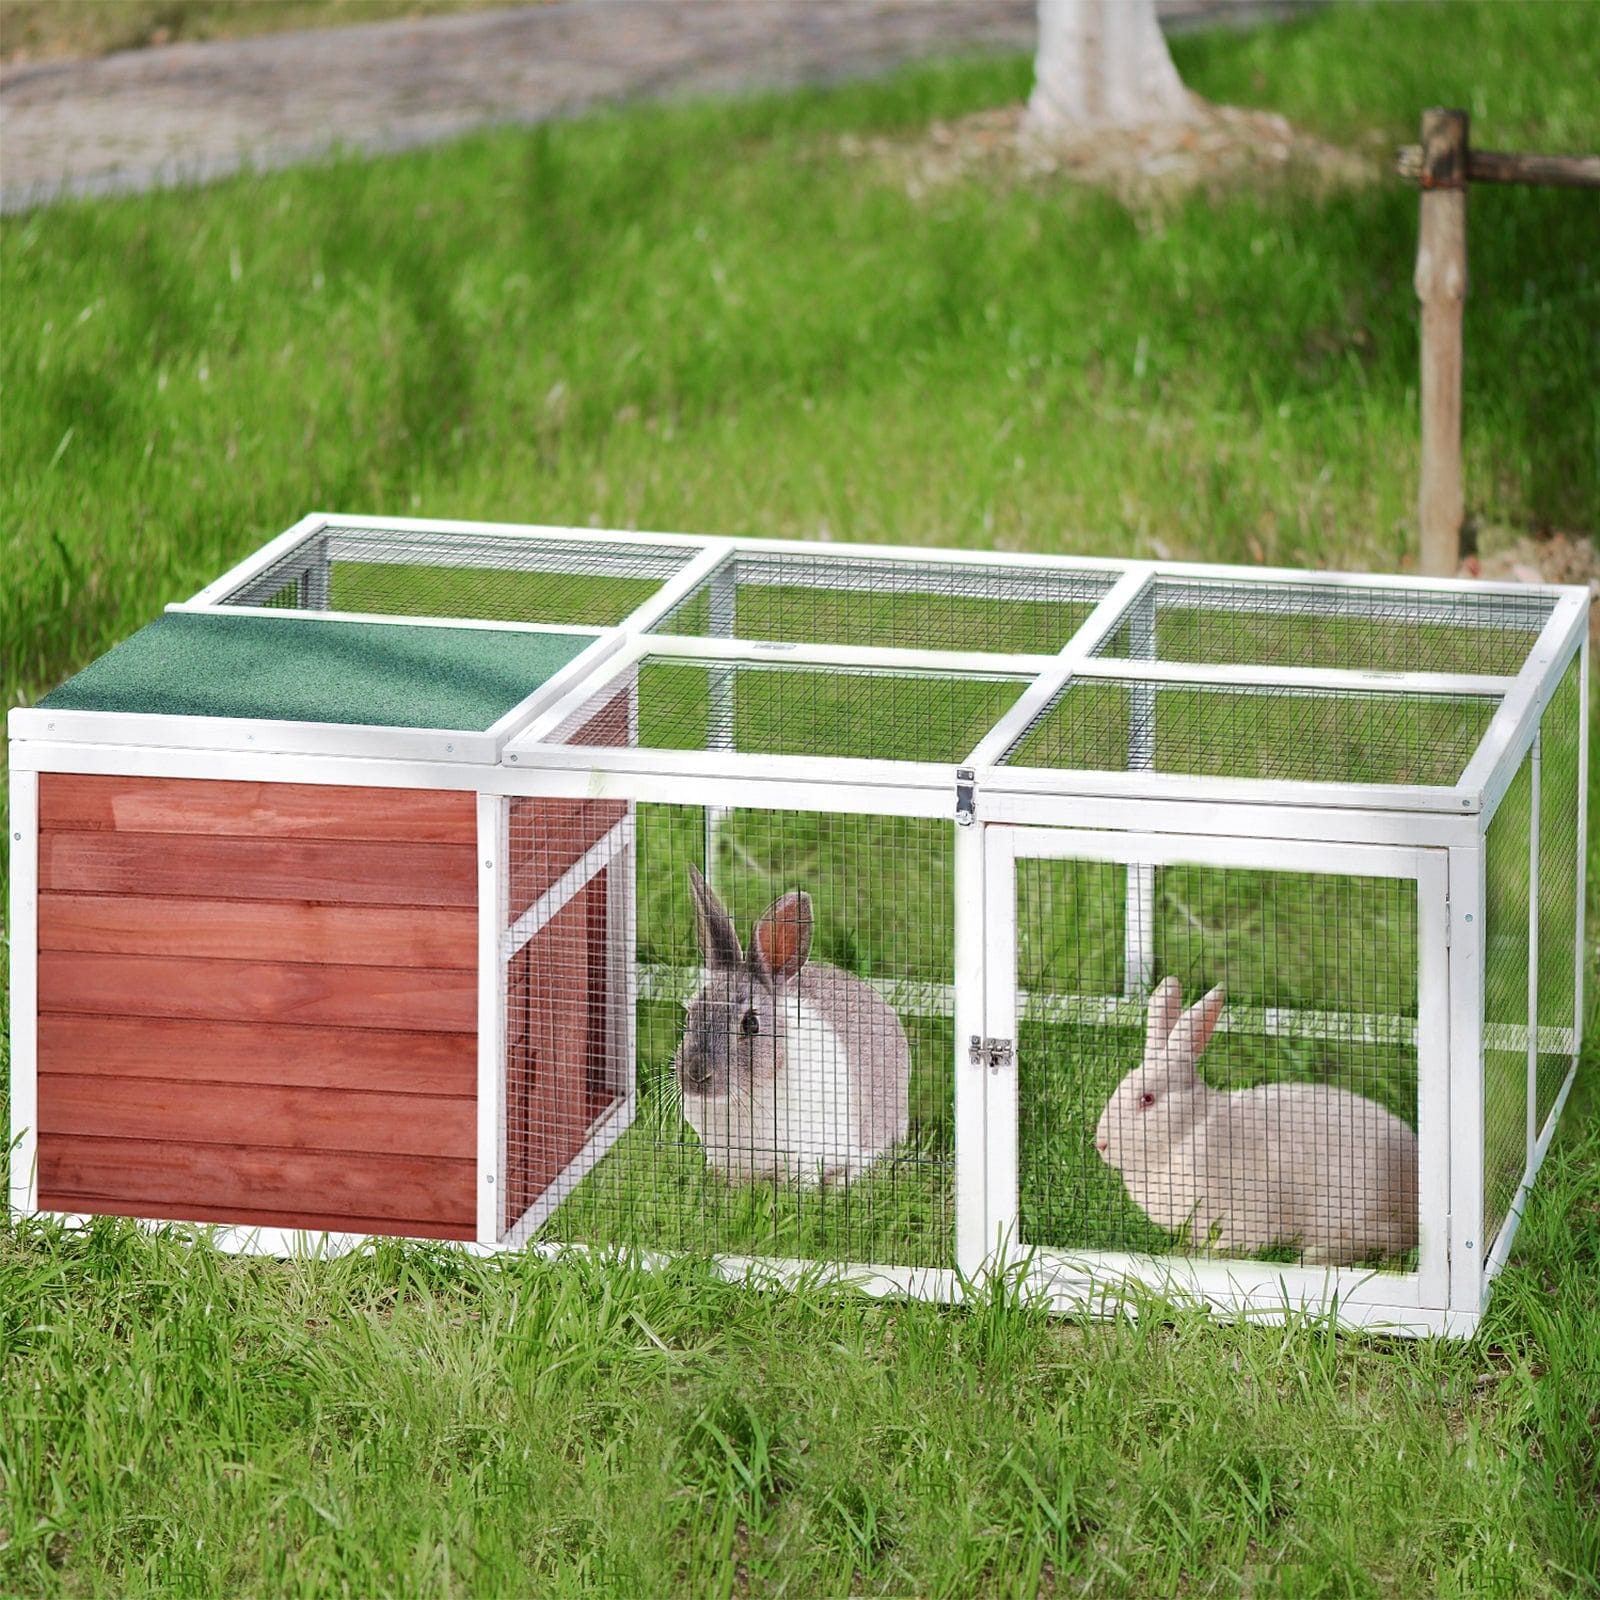 61.8 inches Rabbit Playpen Chicken Coop Pet House Small Animal Cage with Enclosed Run for Outdoor Garden Backyard